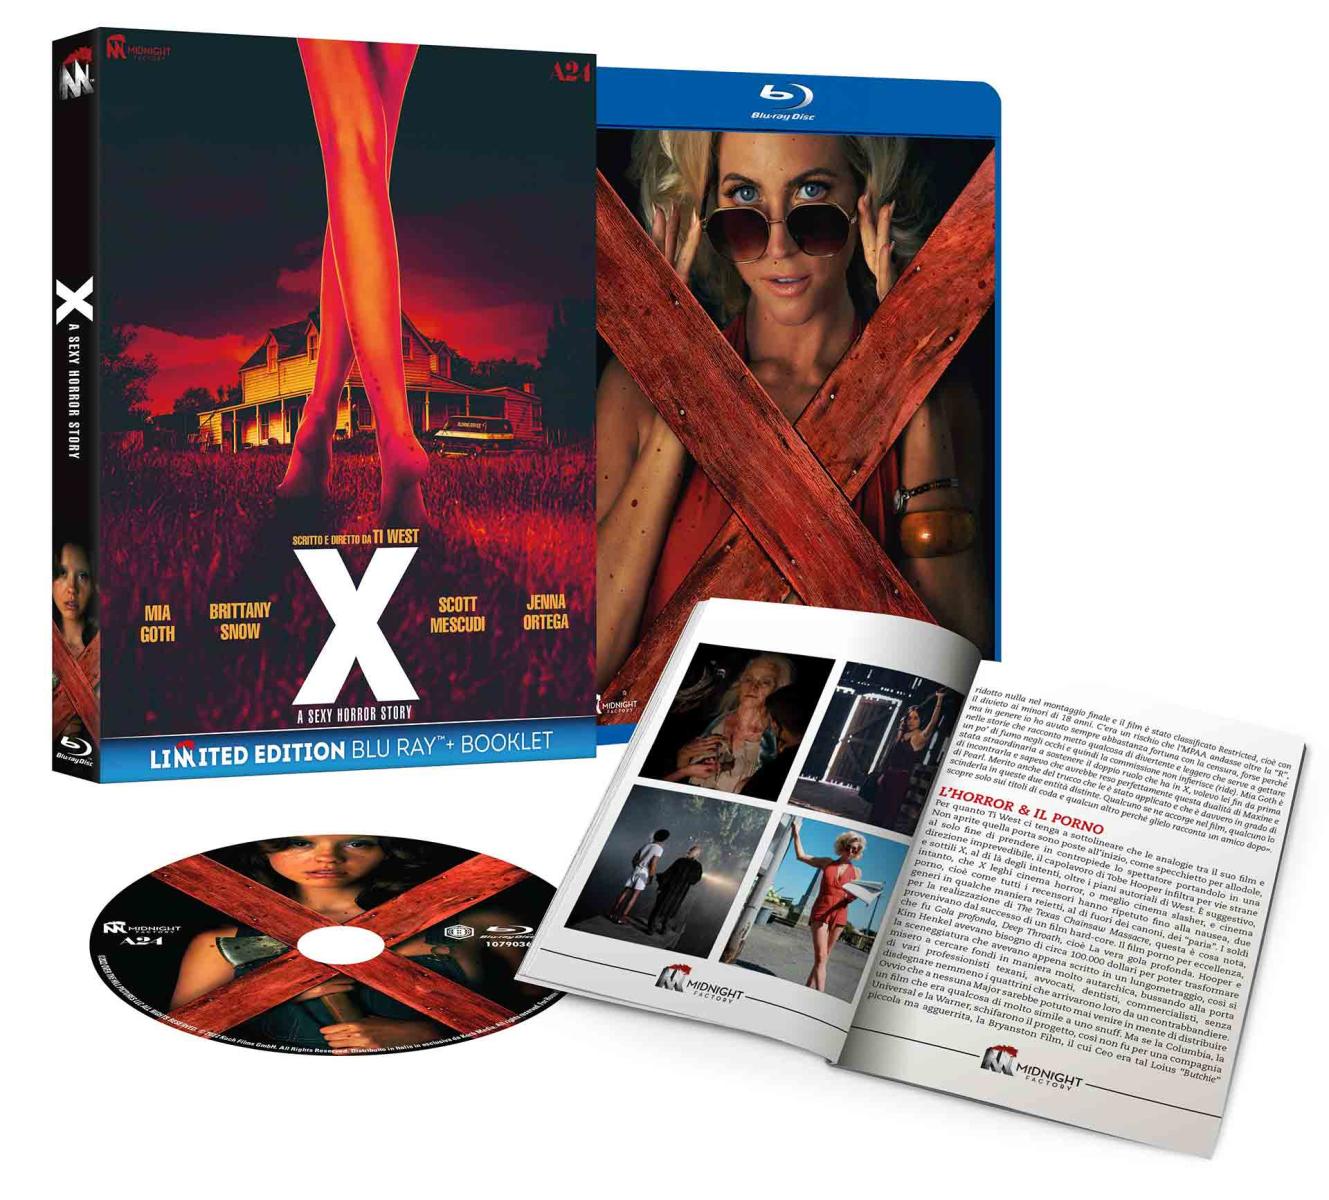 X - A Sexy Horror Story - Limited Edition Blu-ray + Booklet - VM18 (Blu-ray) Image 7